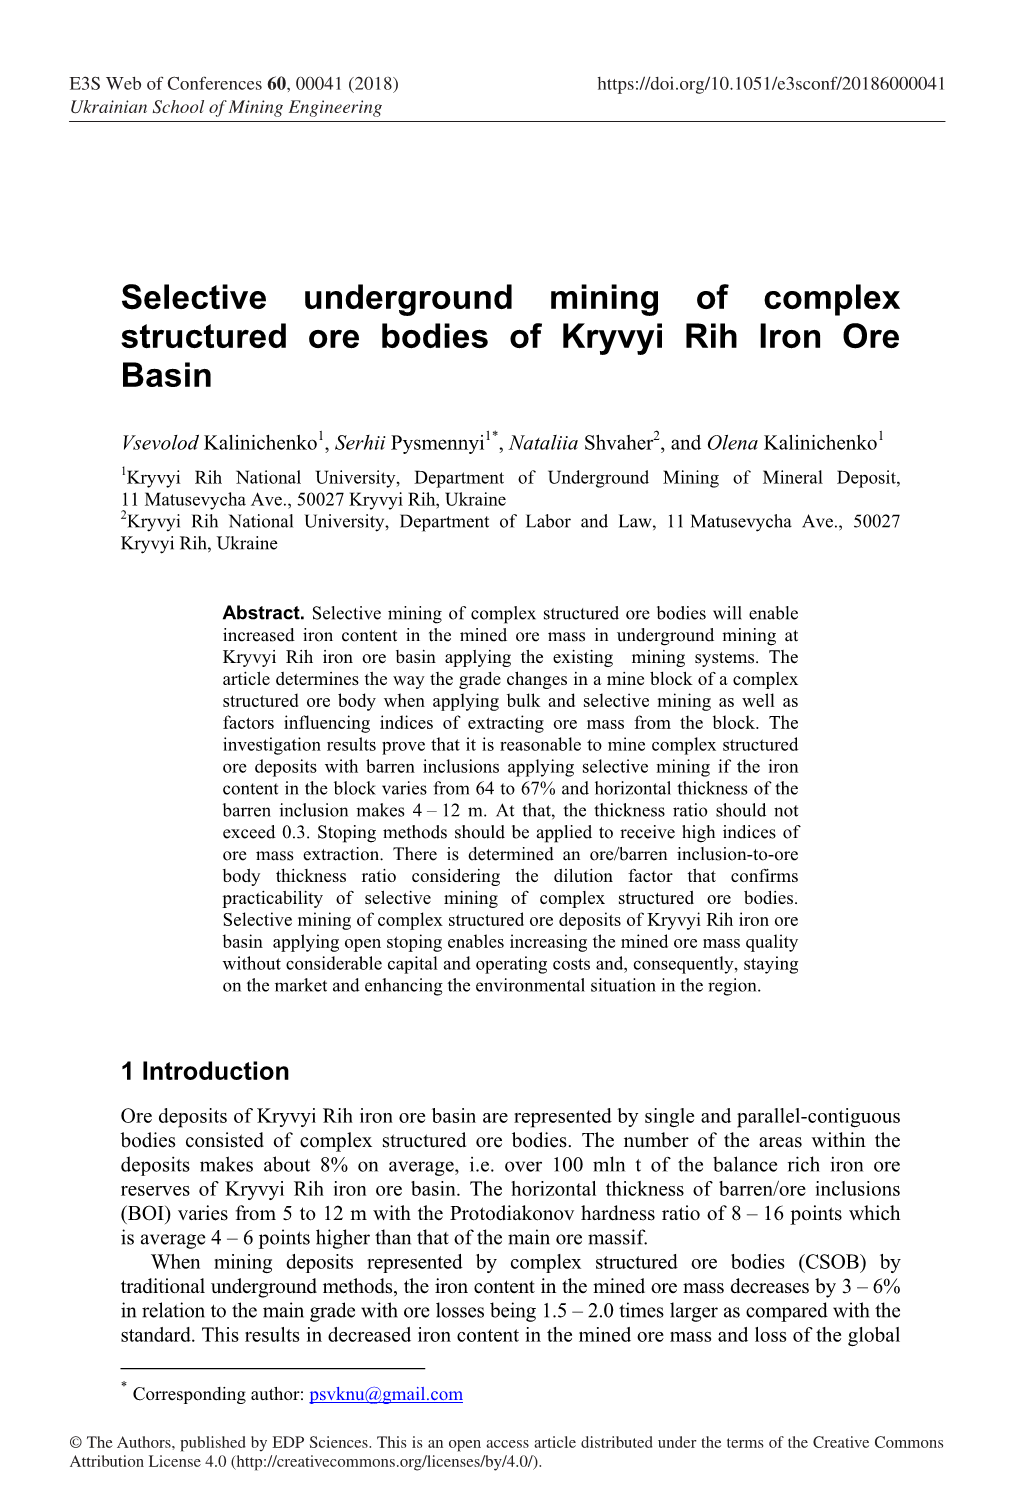 Selective Underground Mining of Complex Structured Ore Bodies of Kryvyi Rih Iron Ore Basin